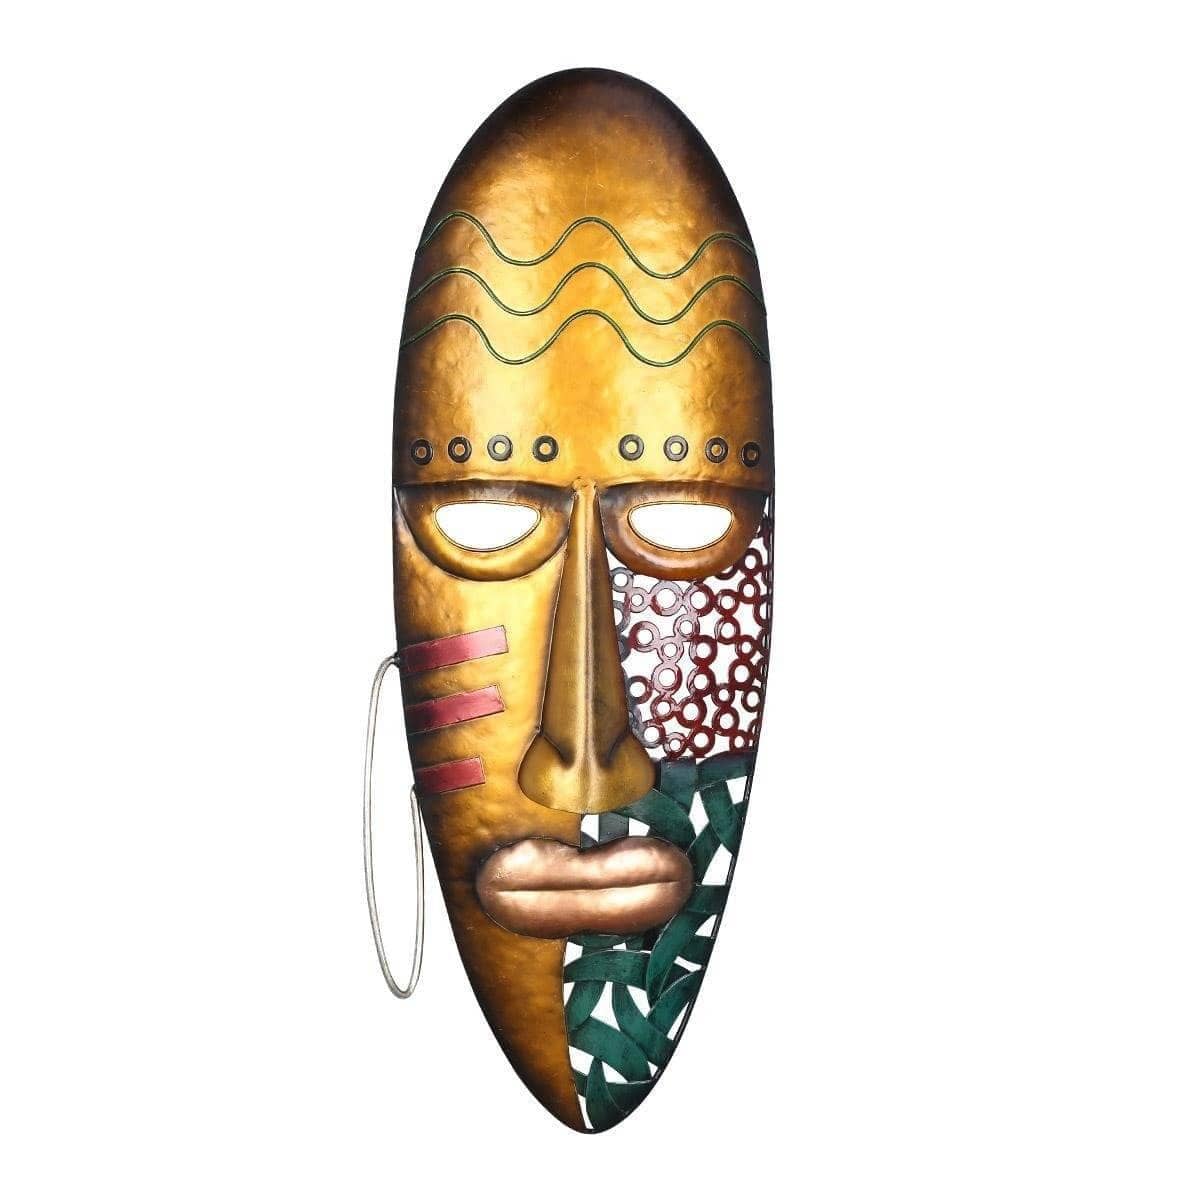 Exquisite African Face Mask Wall Art: Enrich Your Space with Cultural Charm